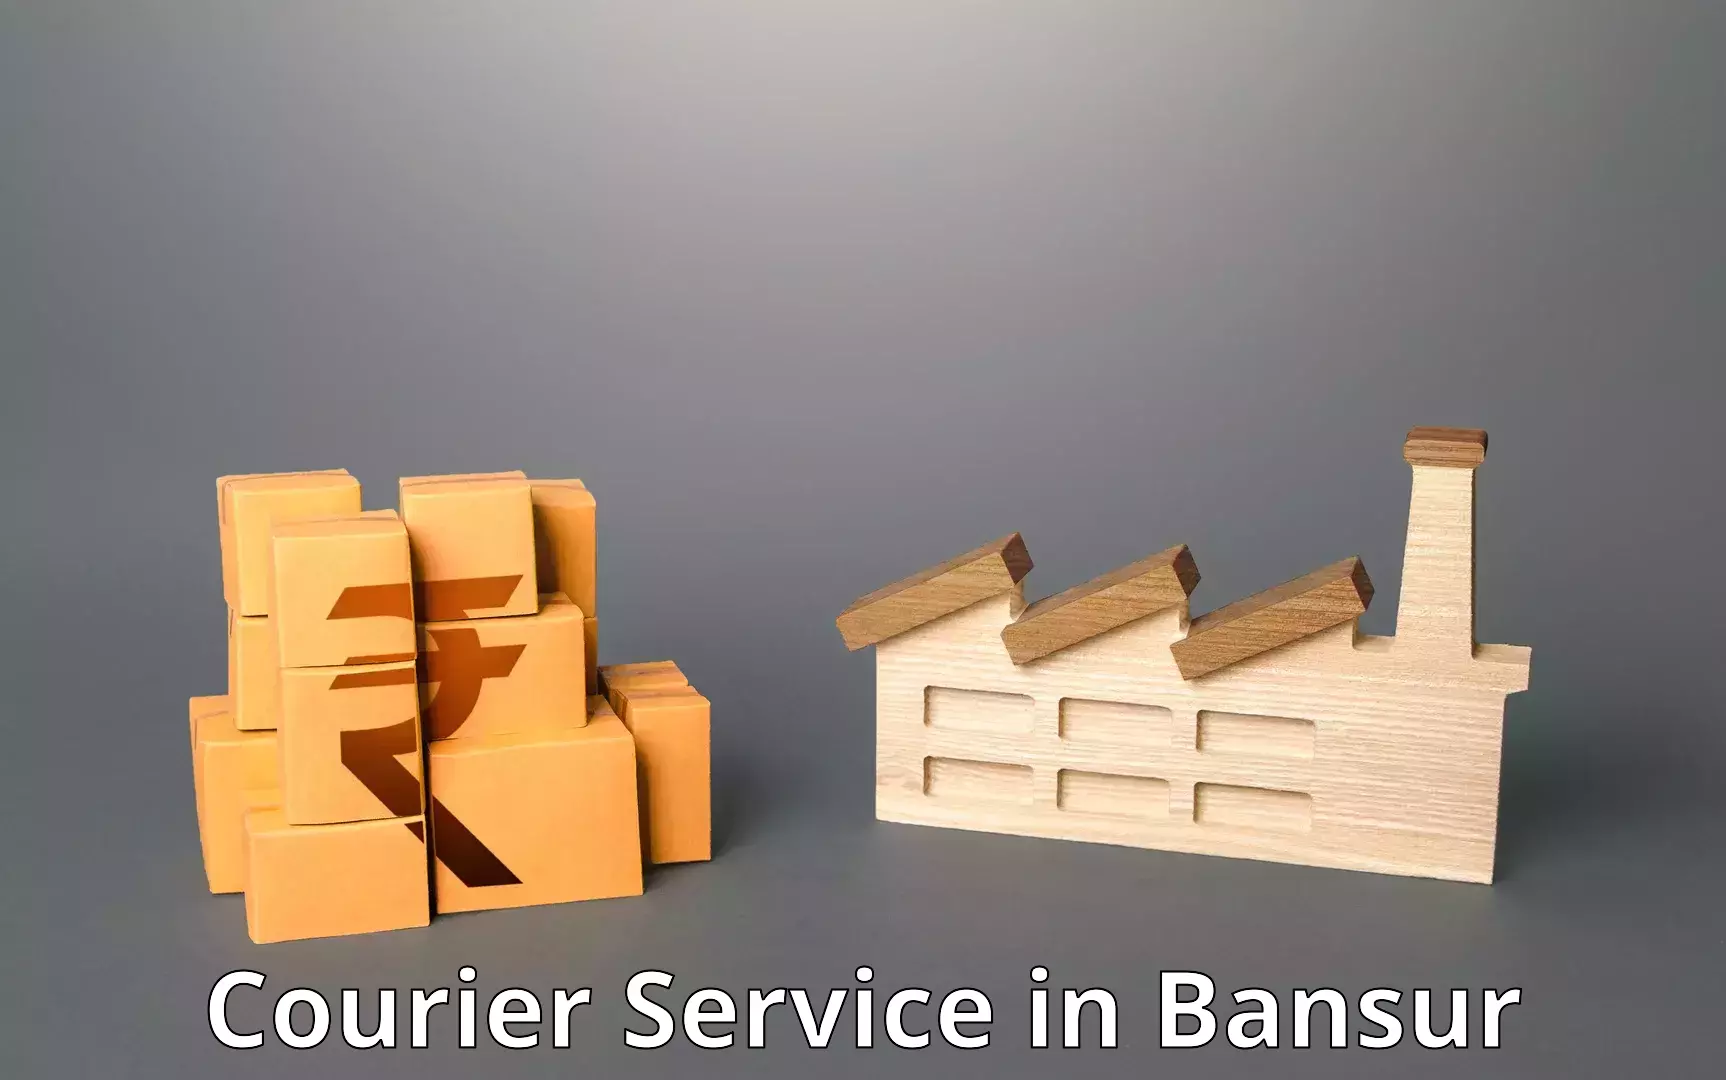 Next day courier in Bansur